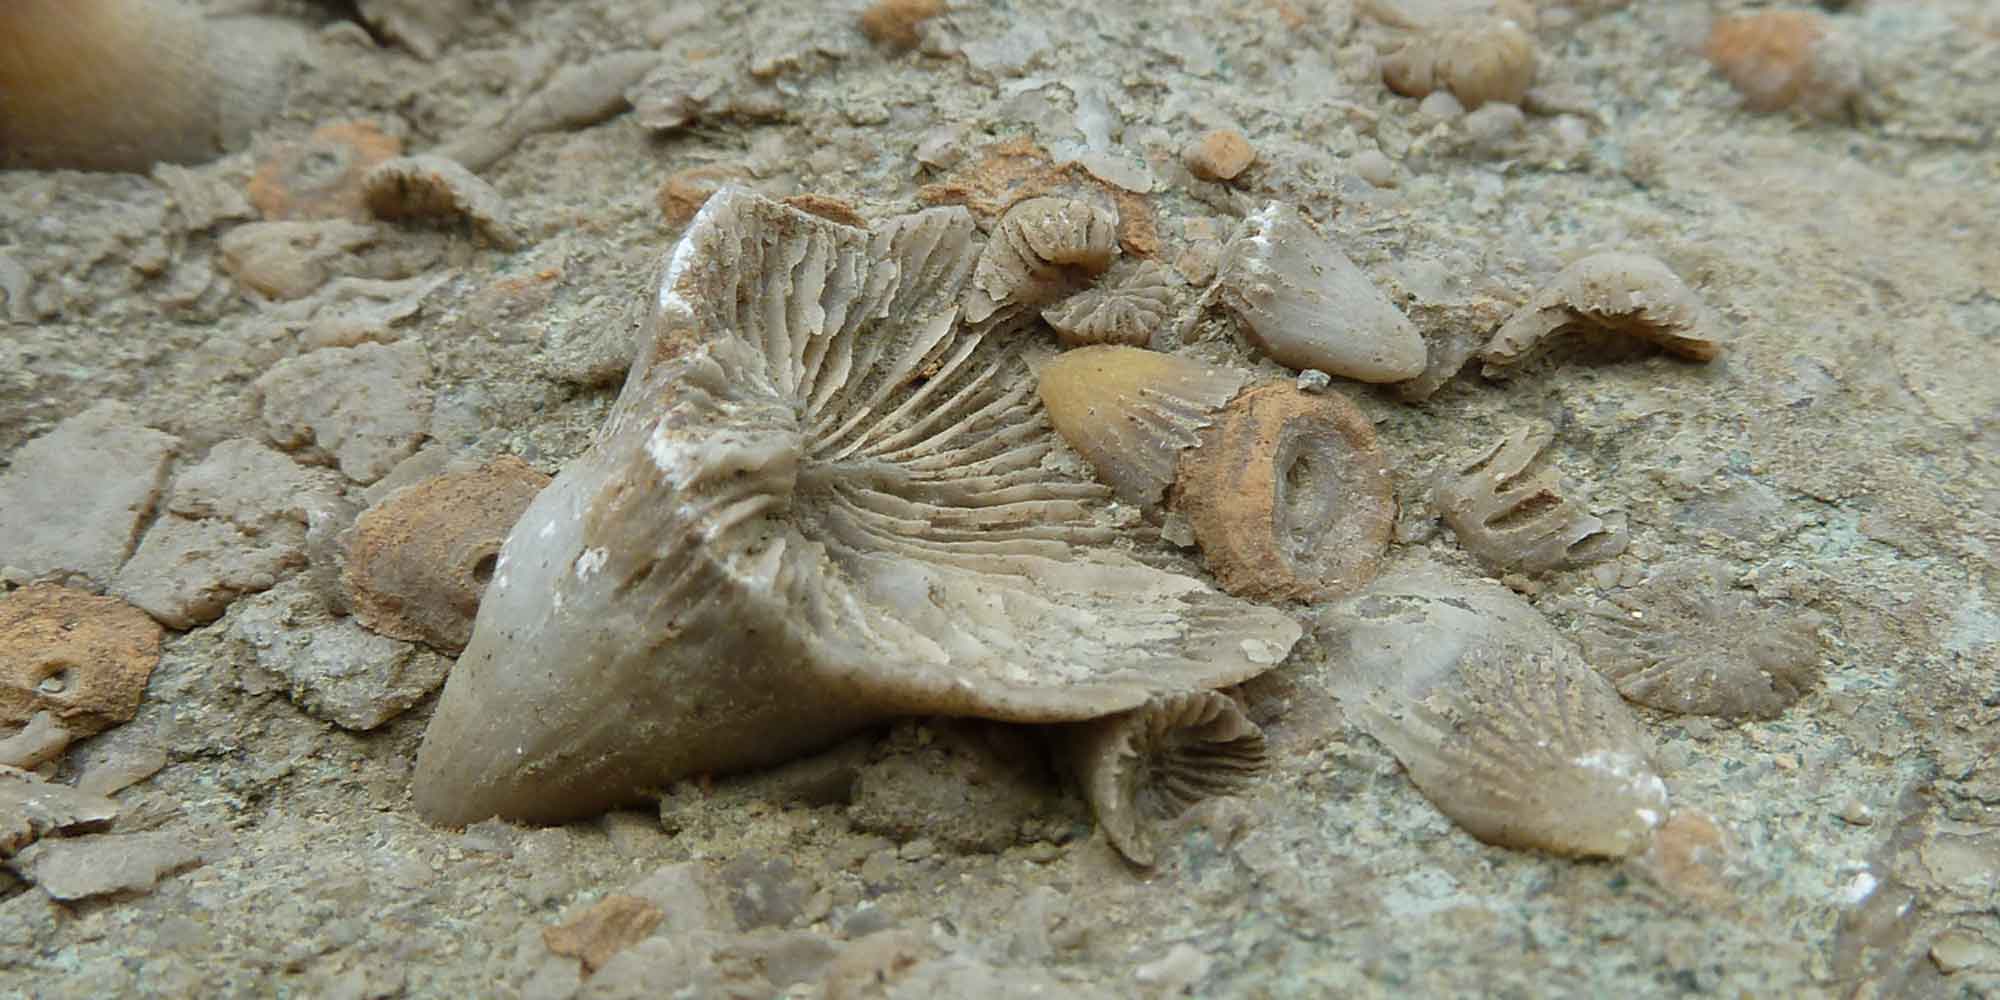 Photograph of a rugose coral fossil.